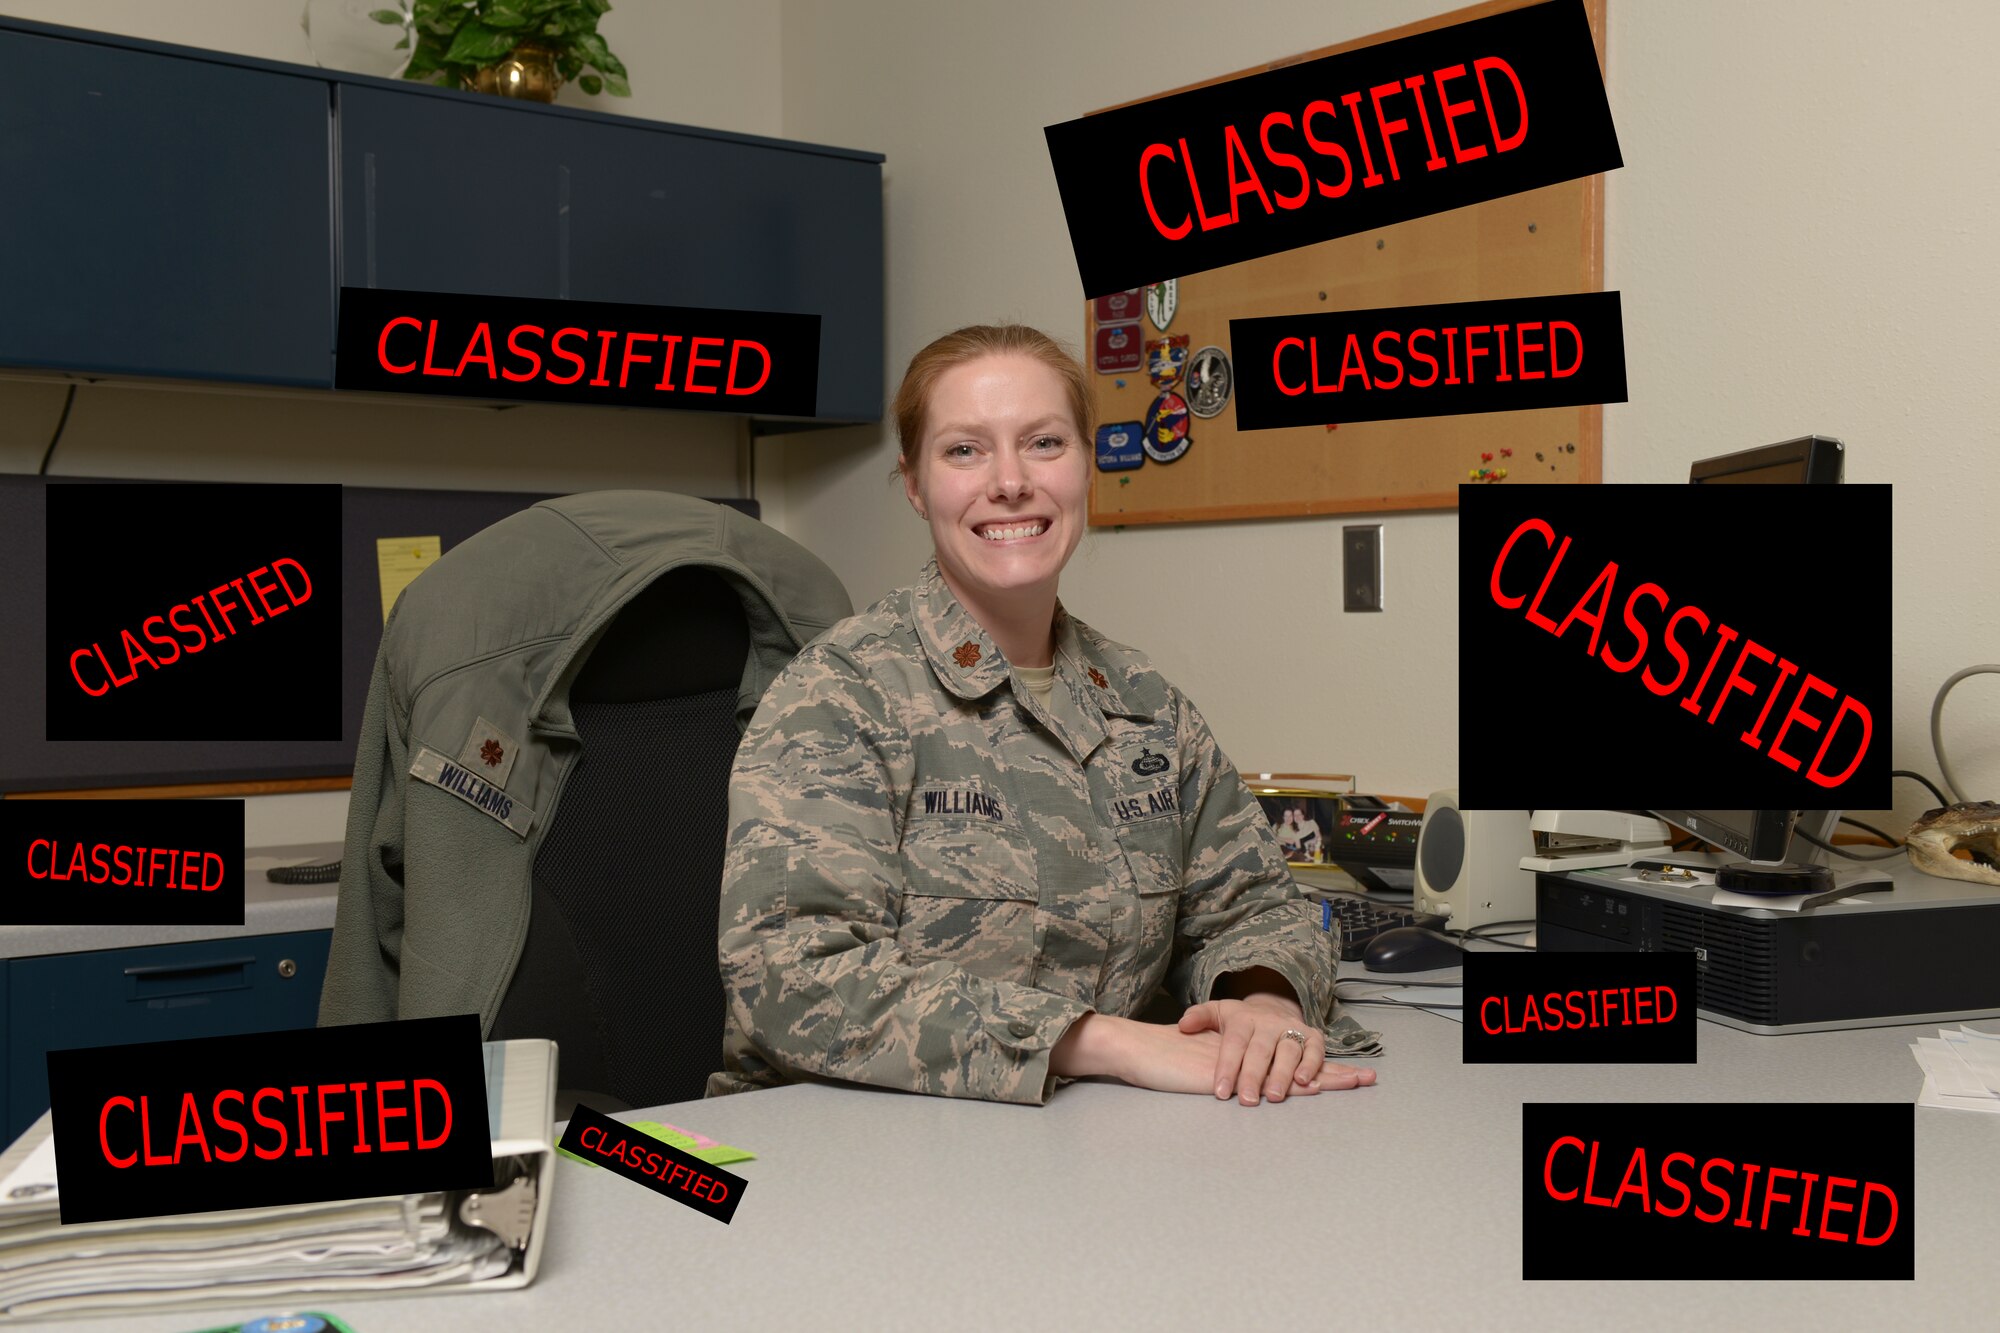 U.S. Air Force Maj. Victoria Williams, the 354th Fighter Wing senior intelligence officer, takes a quick break from work at Eielson Air Force Base, Alaska, March 26, 2015. Williams advises the wing commander and senior leaders on any threats to their forces at home or deployed and manages intelligence professionals assigned to the wing. (U.S. Air Force photo illustration by Senior Airman Peter Reft/Released) (This image was manipulated by adding boxes and text to original image)